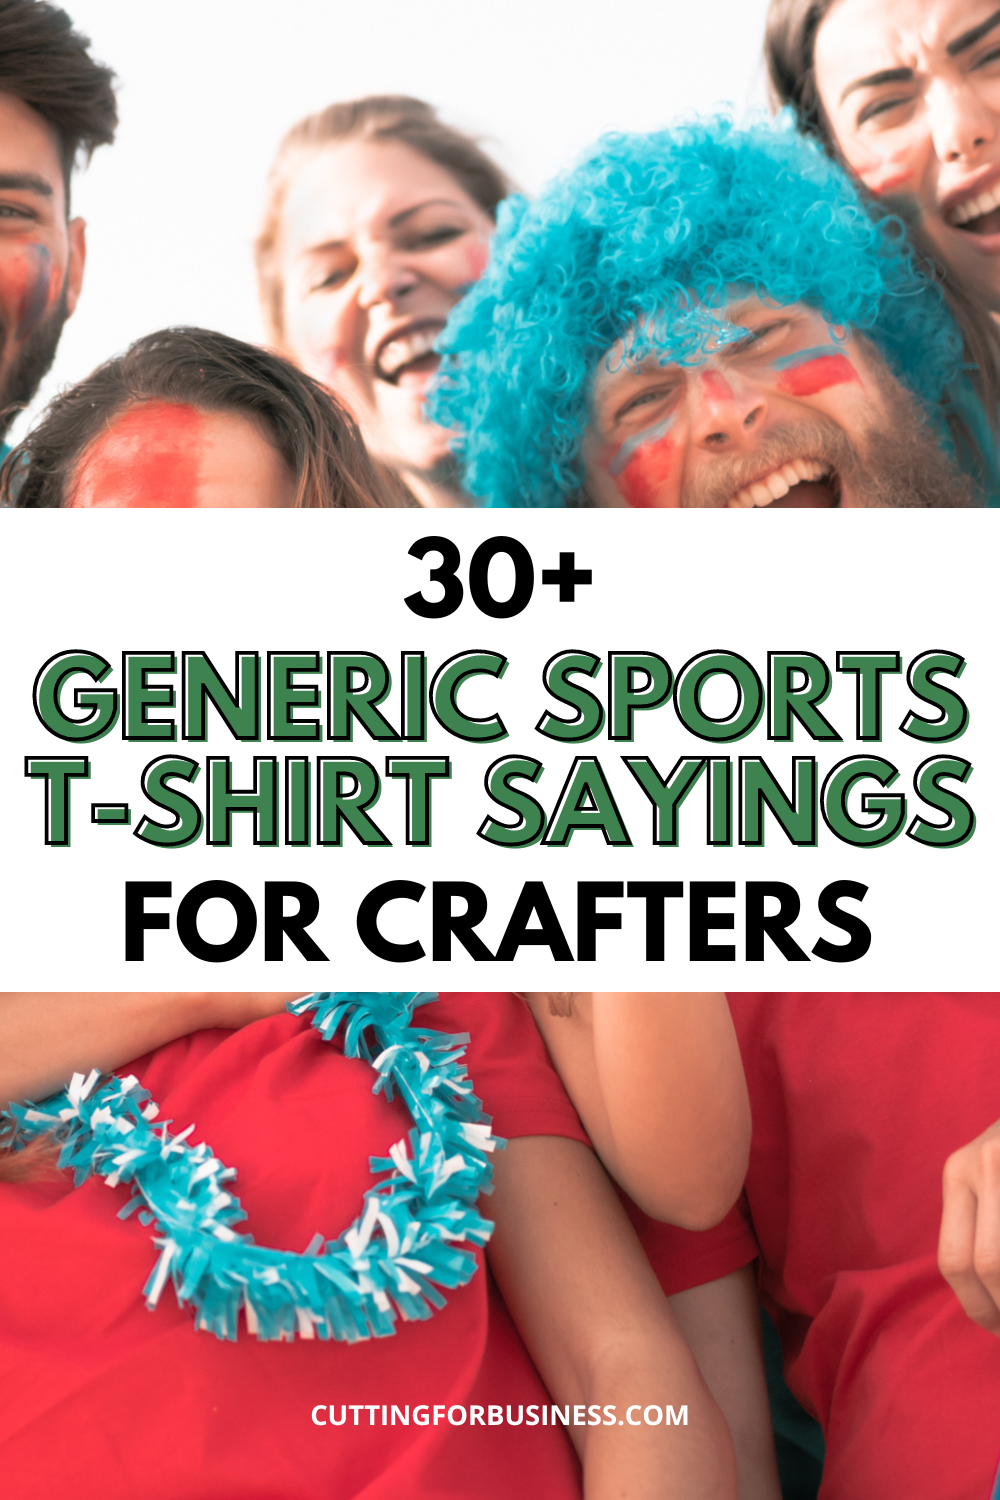 30+ Generic Sports T-Shirt Sayings for Crafters - cuttingforbusiness.com